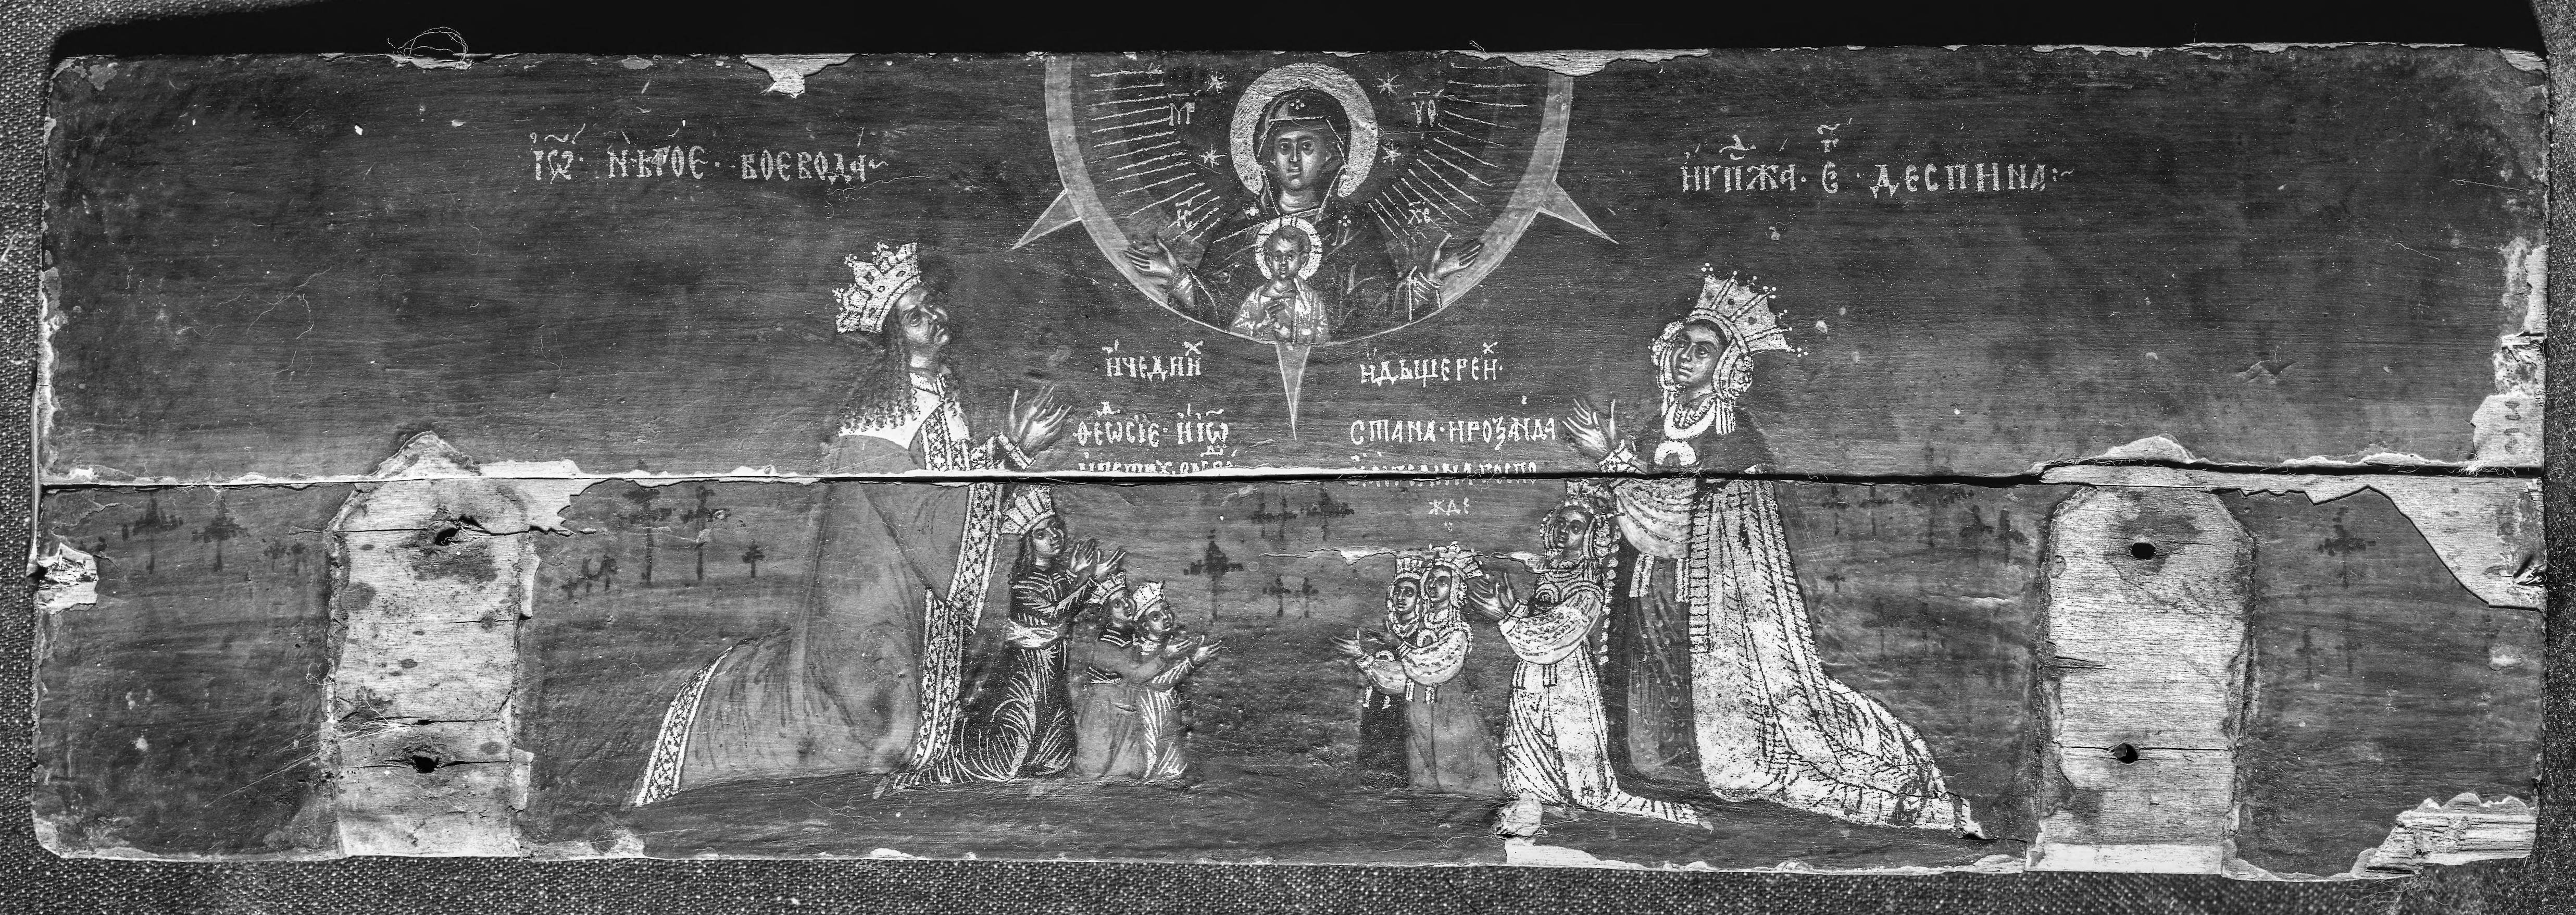 Lid of a wooden box showing Neagoe Basarab and his immediate family in adoration of the Virgin Blachernitissa, 1512–21, Wallachia, modern Romania, now in the collection of Saint Catherine Monastery on Mount Sinai (source: UM Sinai Archive, 577816)
 